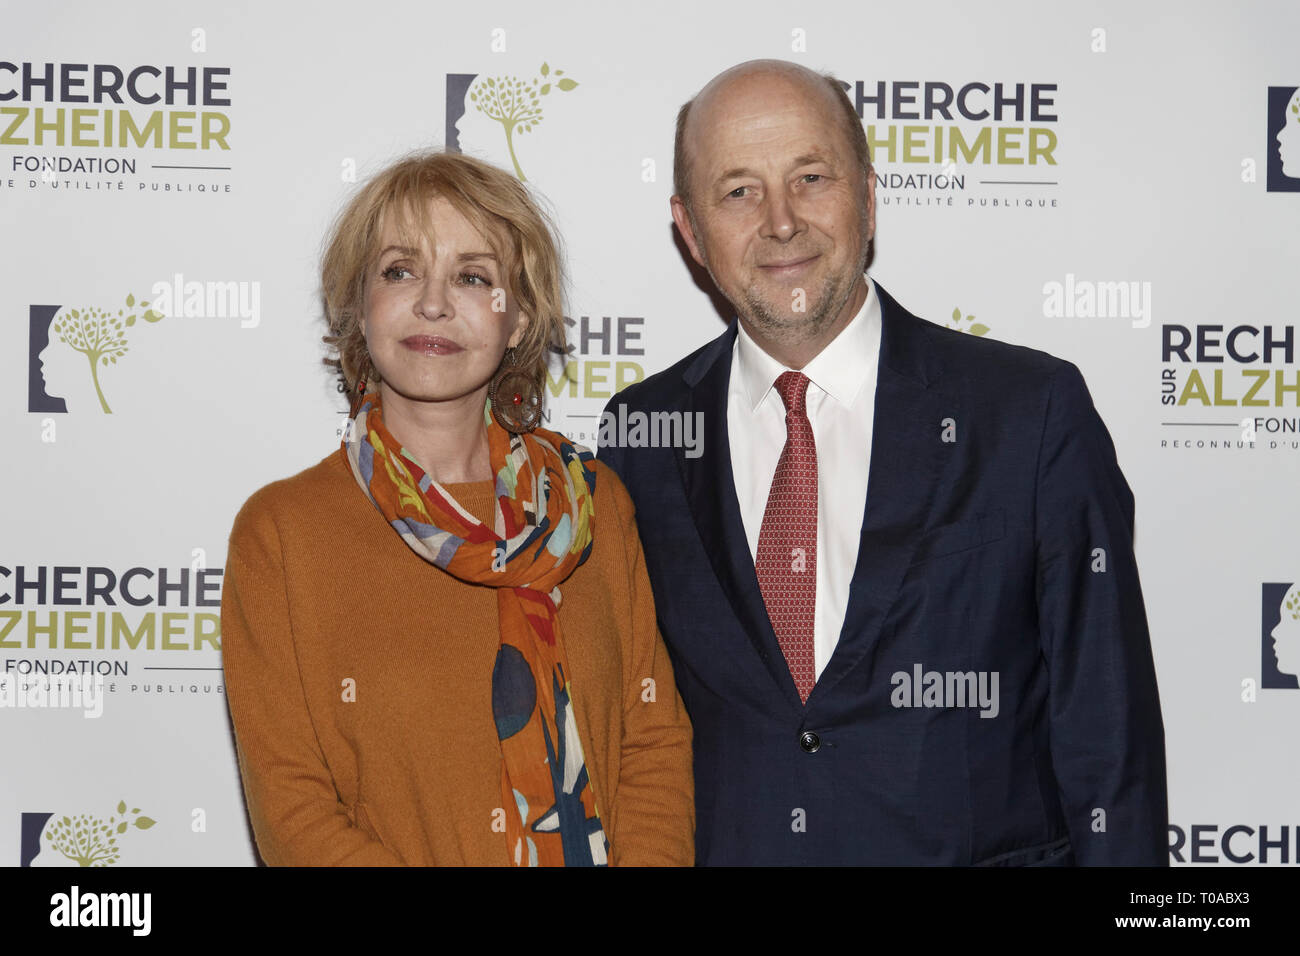 Paris, France. 18th Mar 2019. Fanny Cottençon and Olivier De Ladoucette - Photocall of the 14th Gala 2019 of the Association for Alzheimer Research at the Olympia in Paris on March 18, 2019 Credit: Véronique PHITOUSSI/Alamy Live News Stock Photo